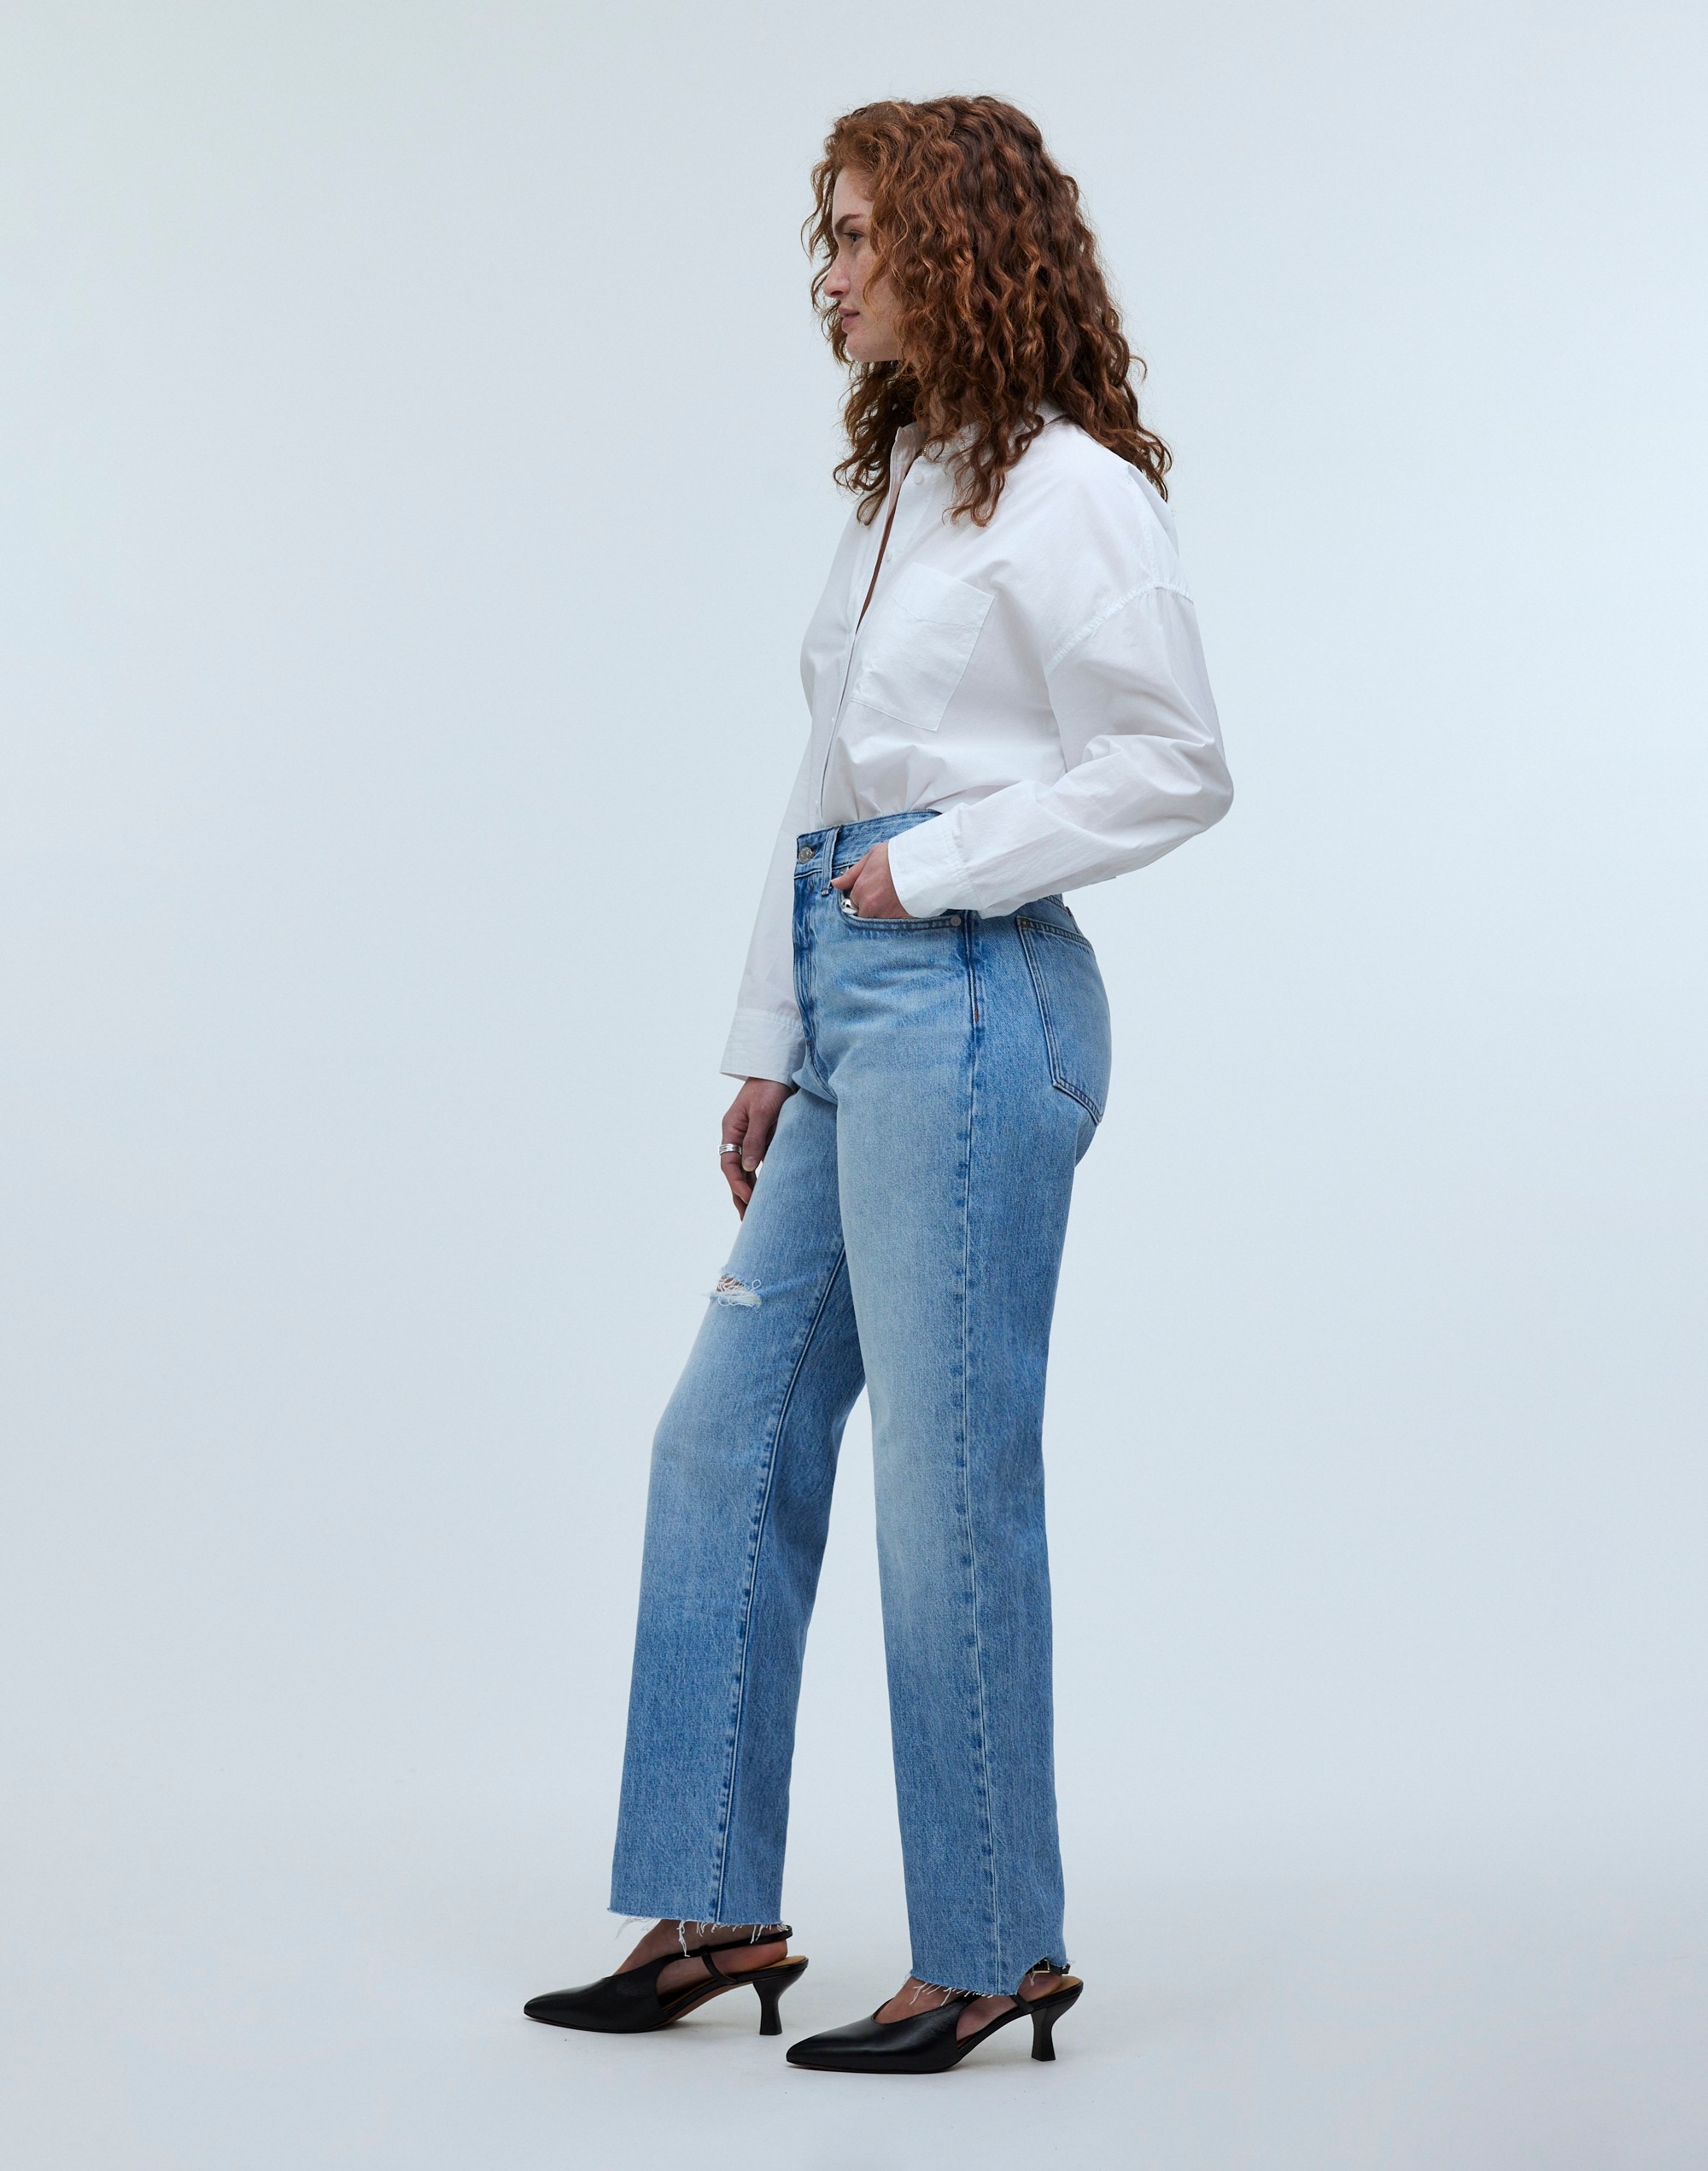 Madewell Curvy Jeans Review: Why They're My Favorite : StyleWise